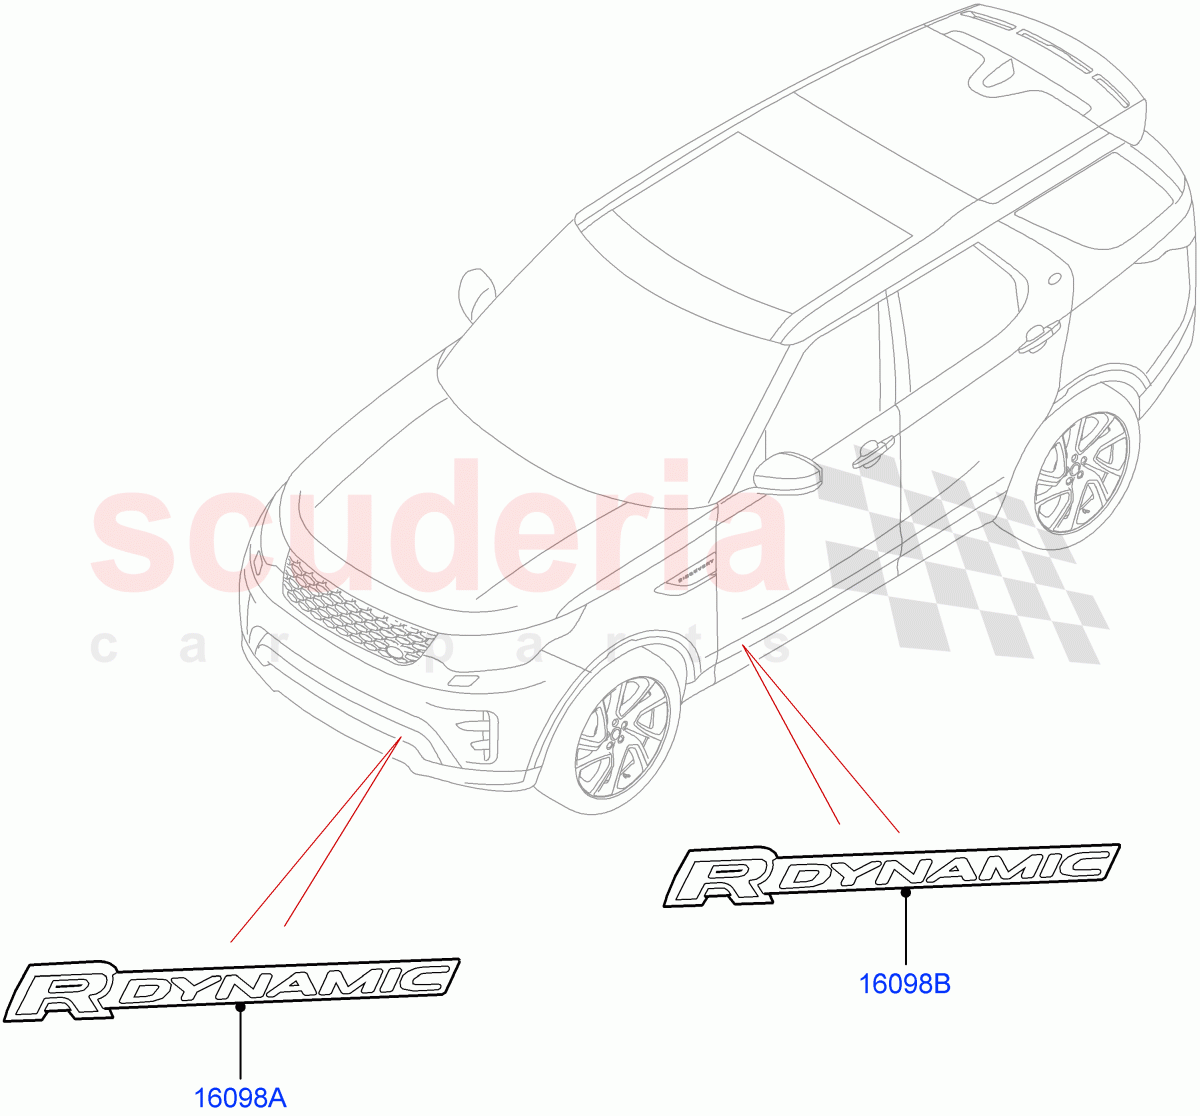 Name Plates(Nitra Plant Build)(Version - R-Dynamic)((V)FROMM2000001) of Land Rover Land Rover Discovery 5 (2017+) [3.0 DOHC GDI SC V6 Petrol]